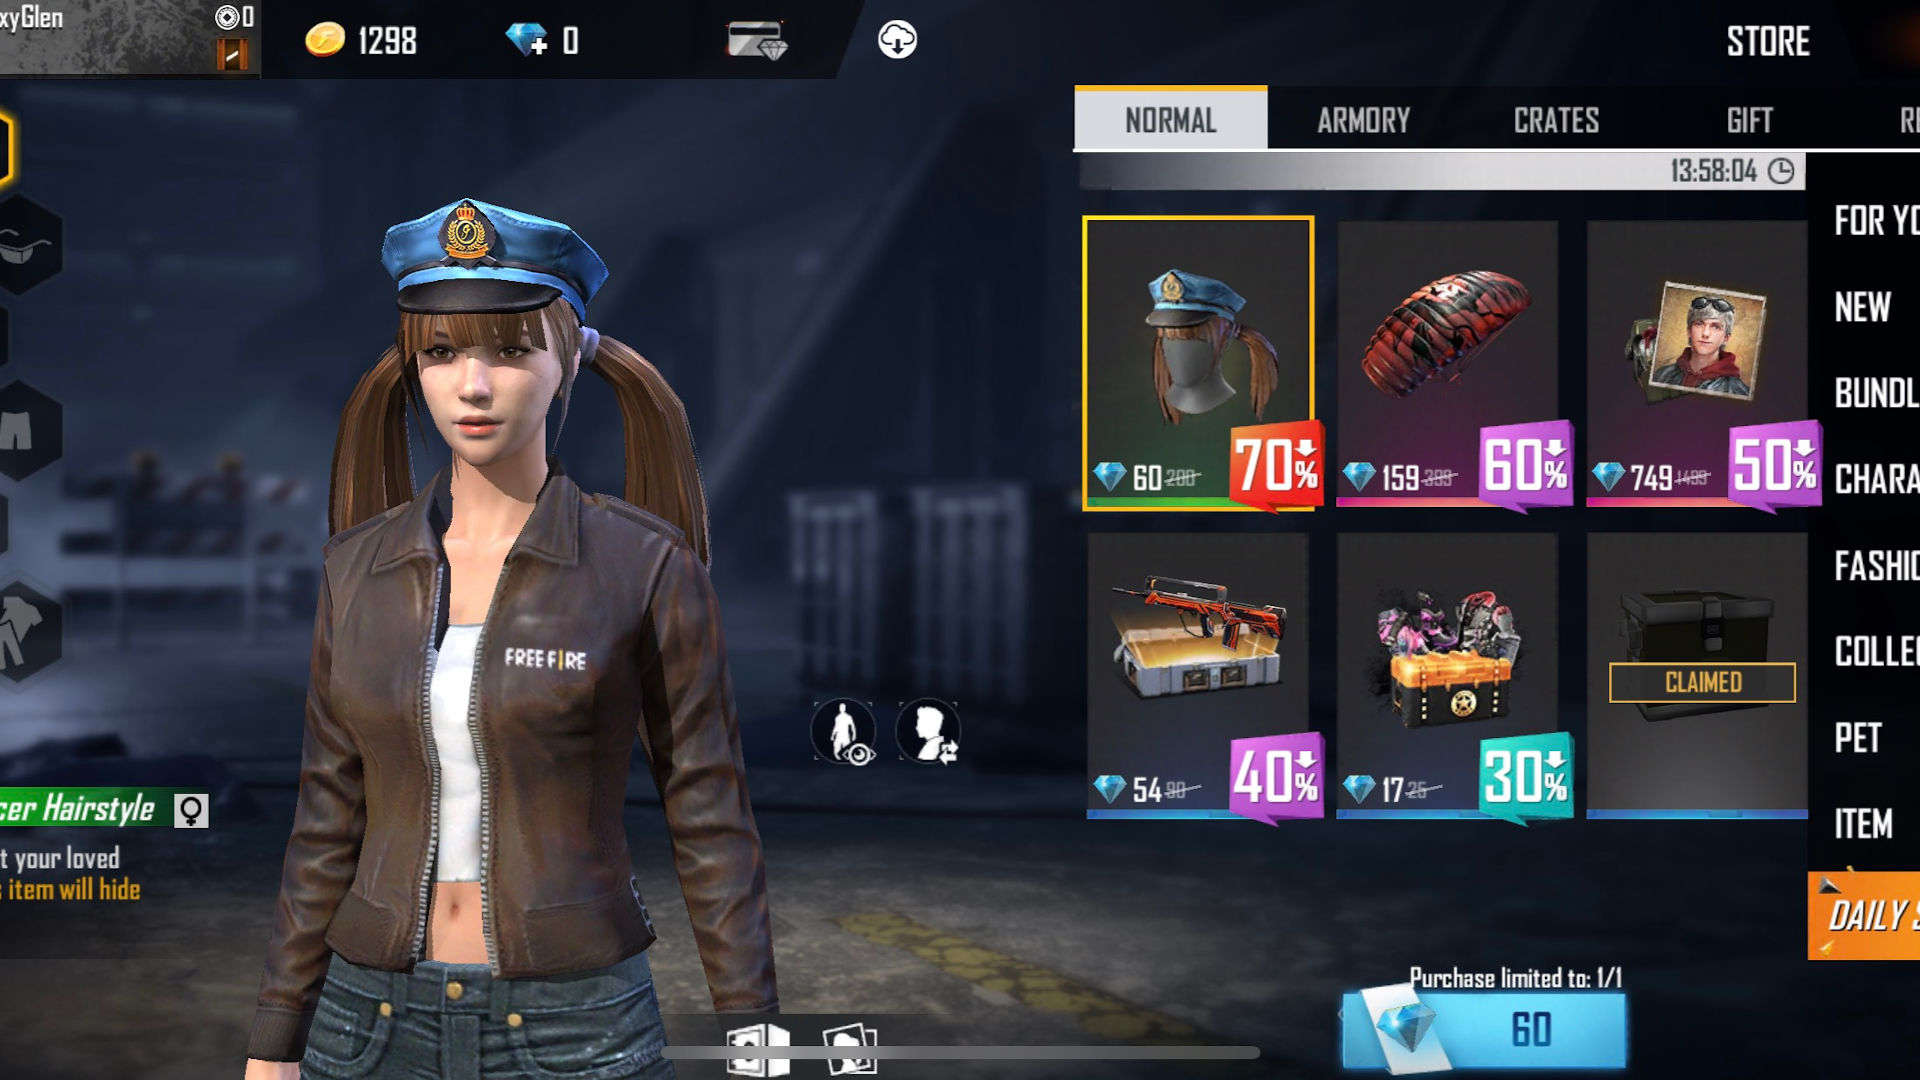 How to get Free Fire free diamonds! No payment required